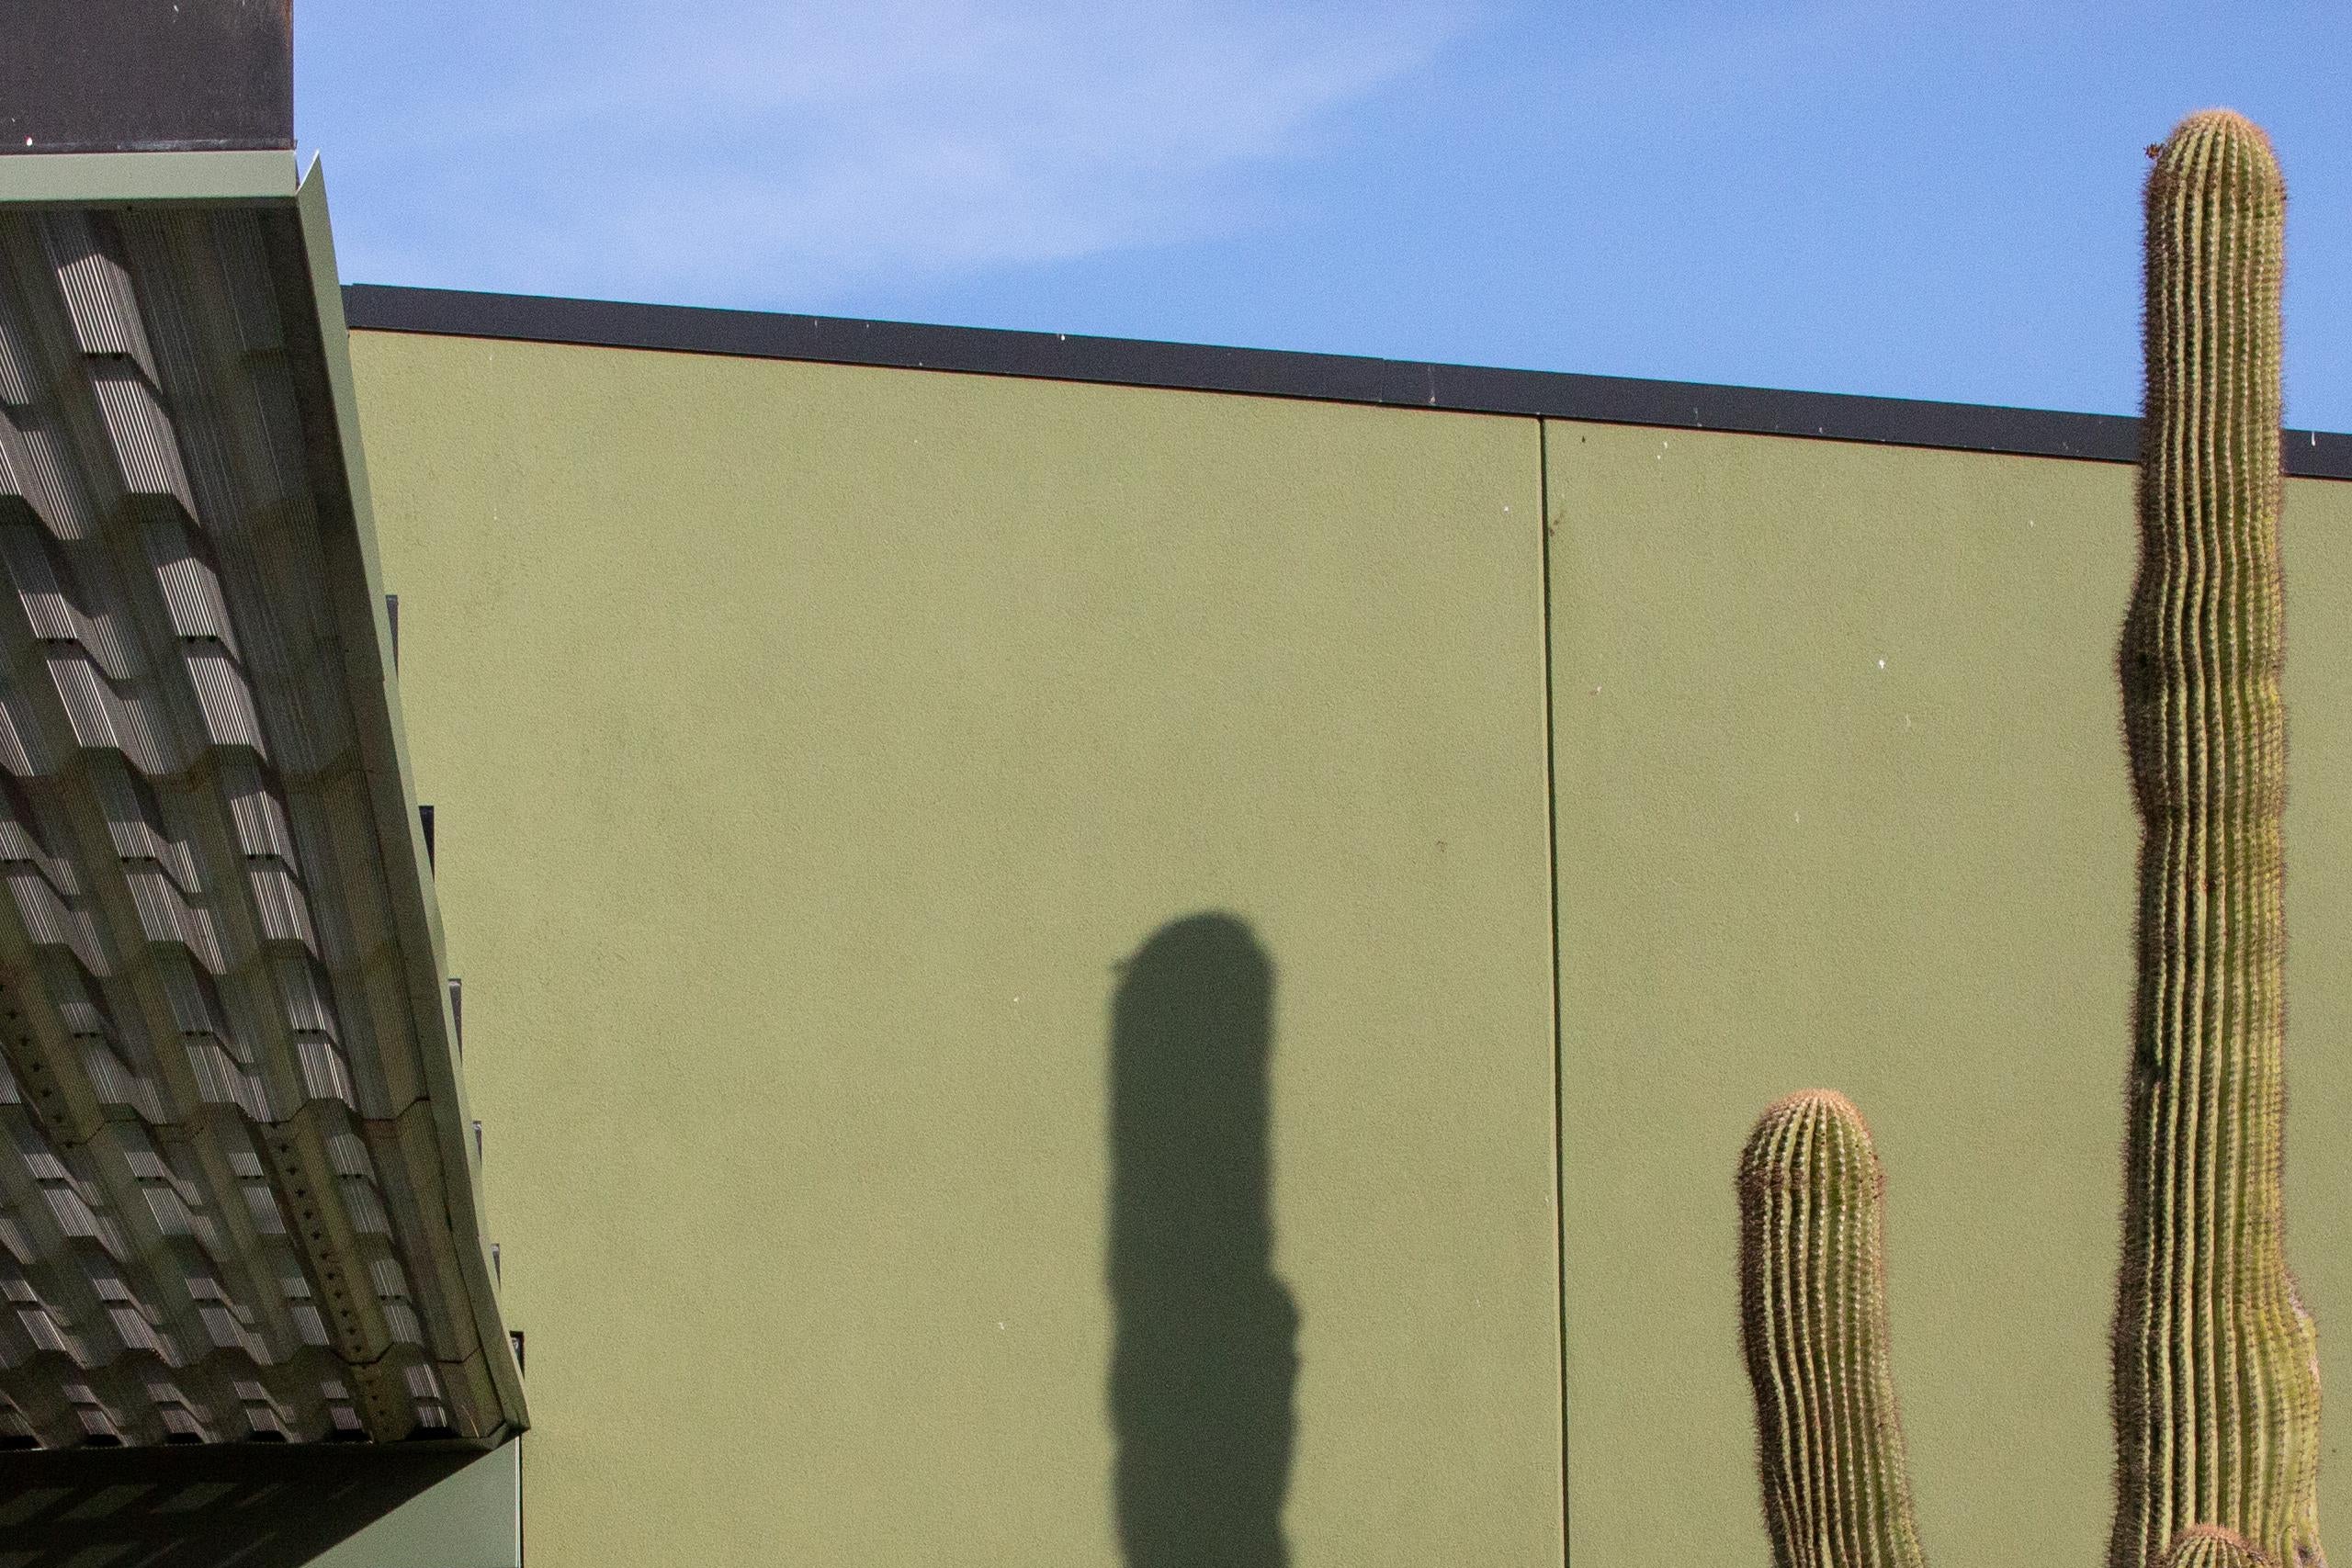 A man walks into a polling center with the shadow of a cactus visible on the wall of the building.